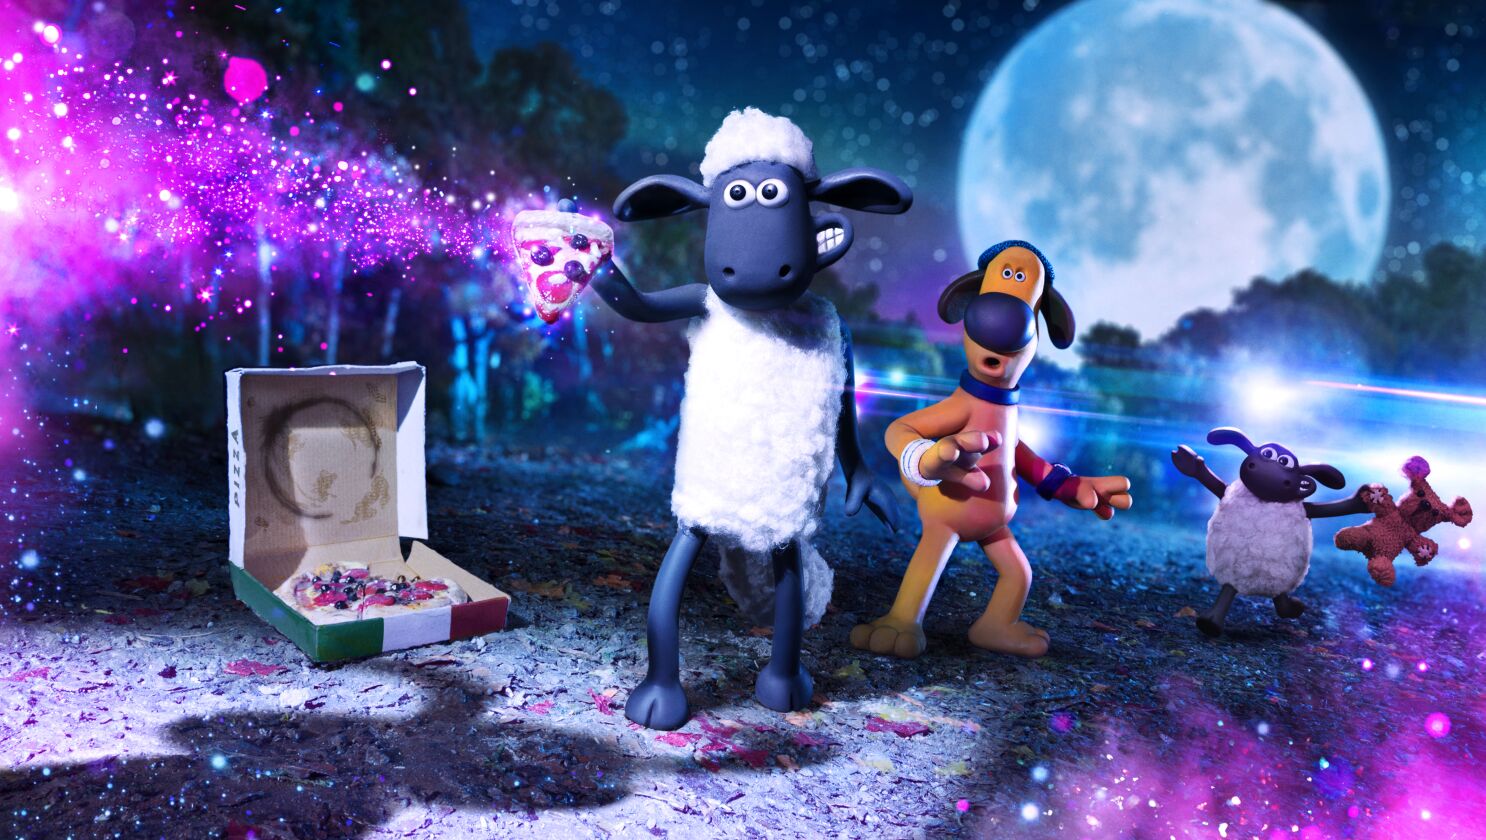 Shaun the Sheep's latest taps into classic sci-fi films - Los Angeles Times